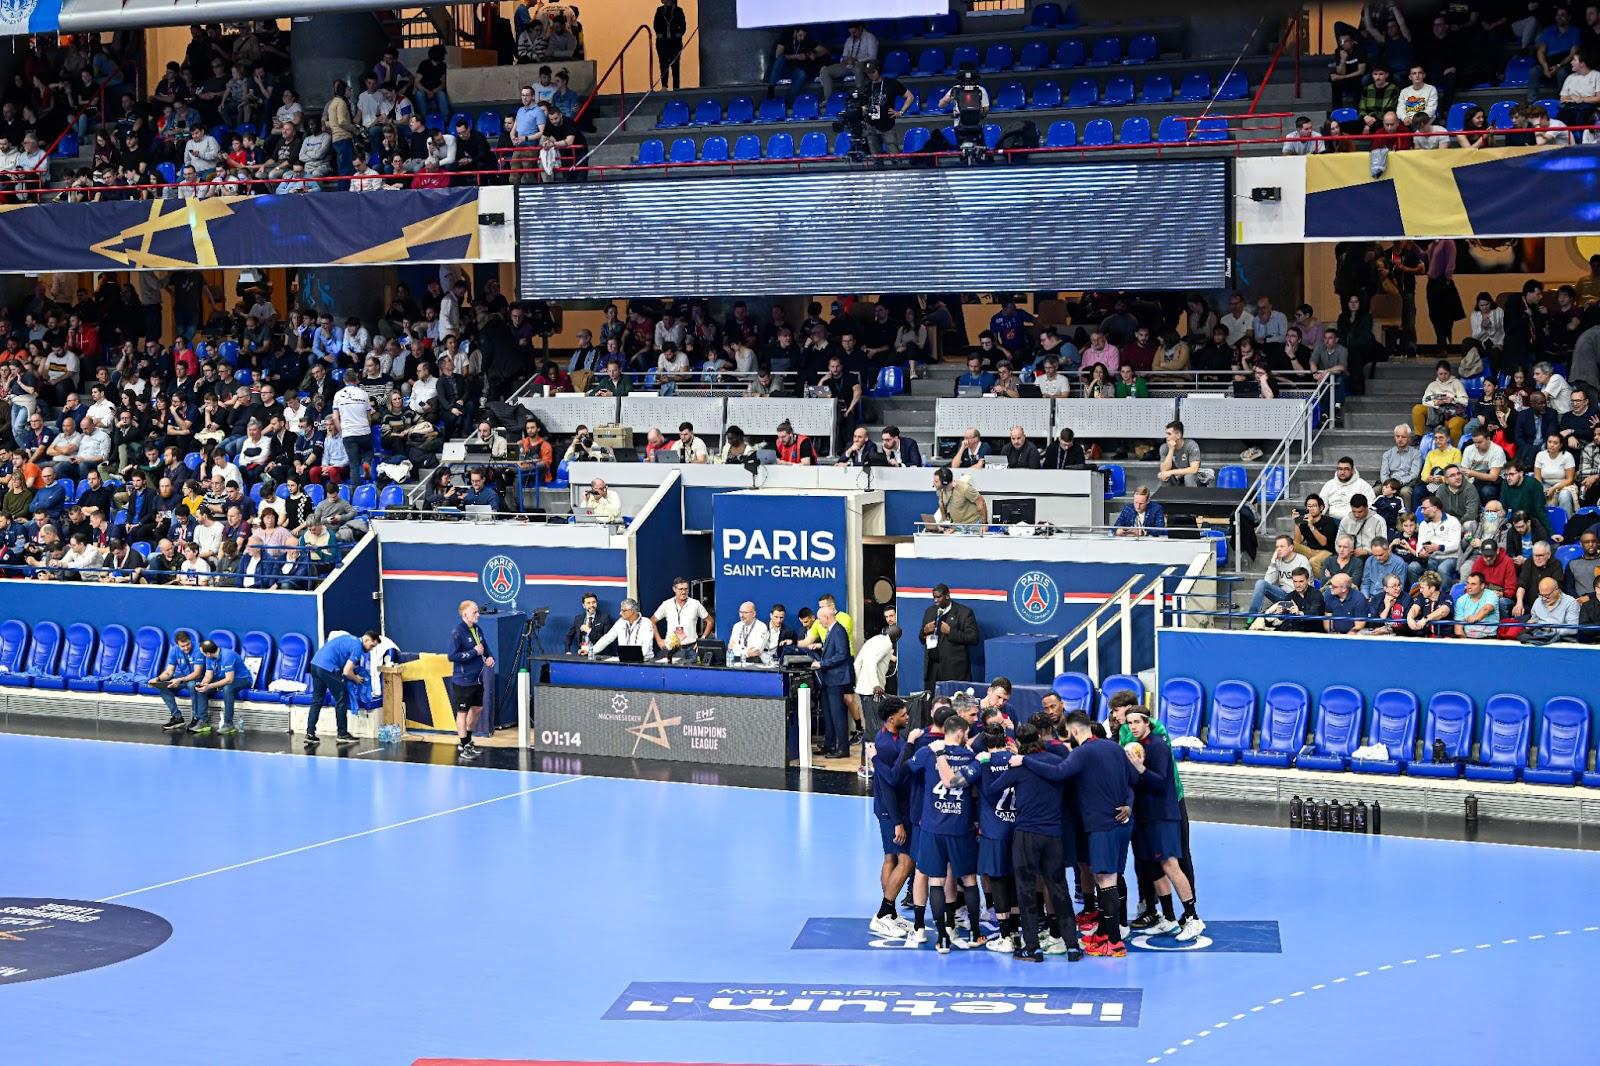 General atmosphere ambiance view or ambience illustration during the EHF Champions League handball match between PSG and Wisla Plock at Stade Pierre de Coubertin 